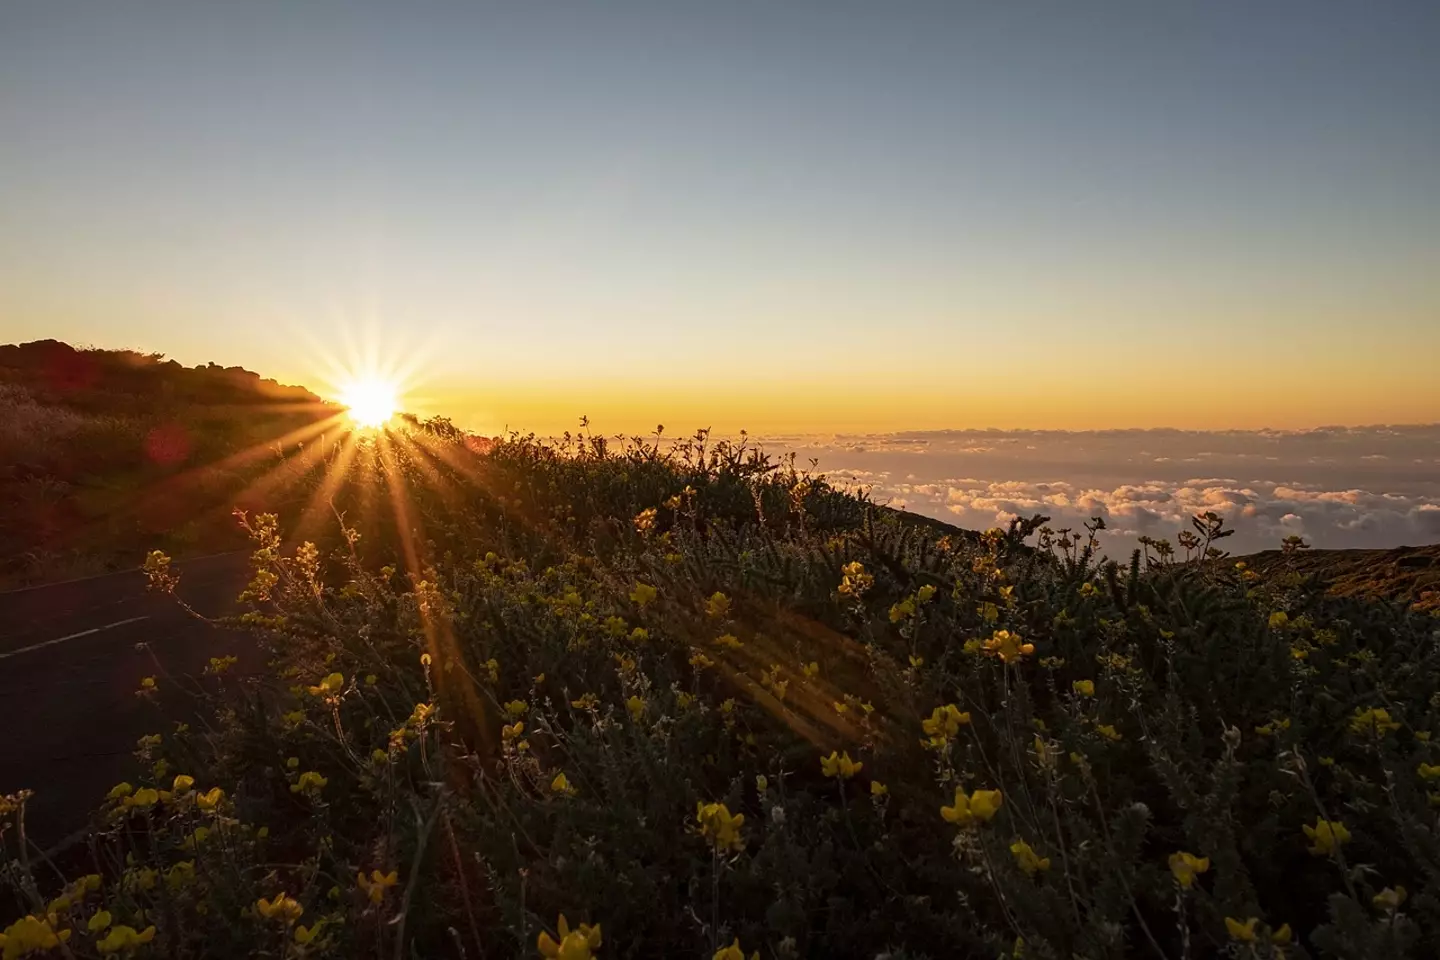 La Palma in the Canary Islands has stunning views.